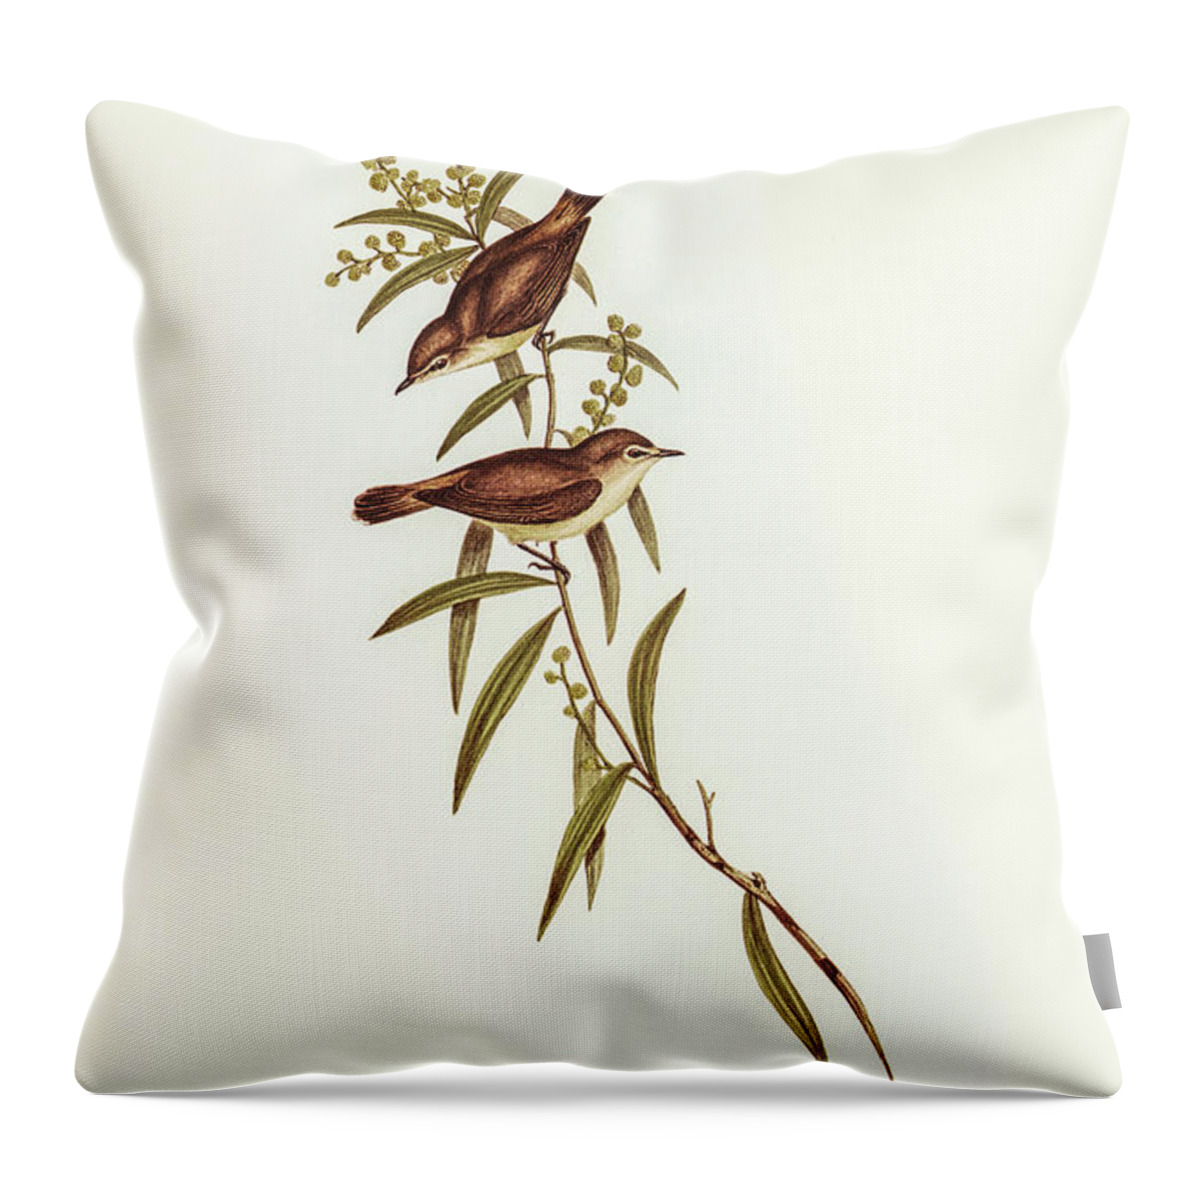 Buff-breasted Gerygone Throw Pillow featuring the drawing Buff-breasted Gerygone, Gerygone laevigaster by John Gould